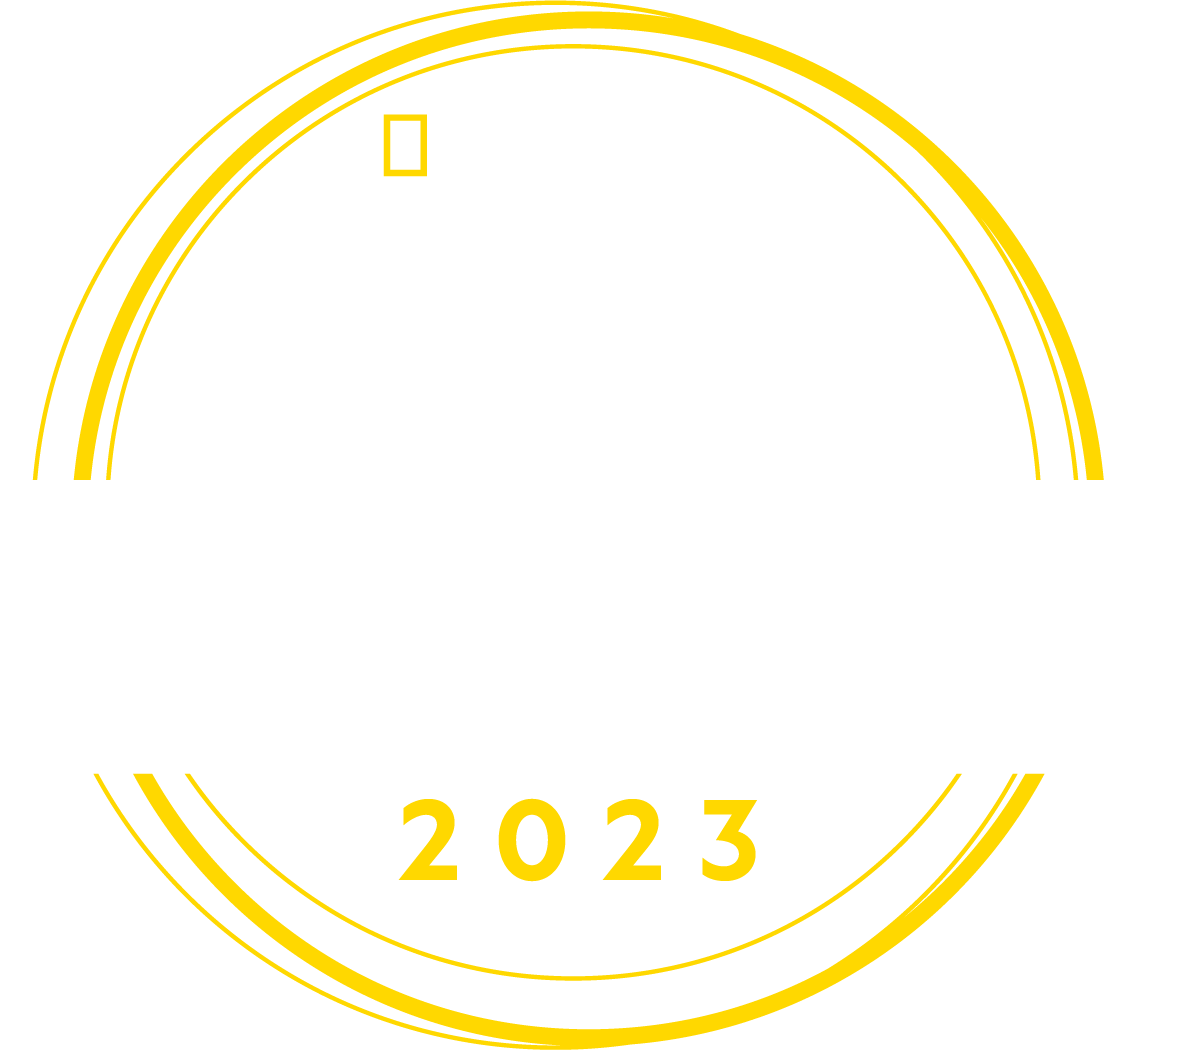 Slovenia makes National Geographic’s coveted ‘Best of the world’ list for 2023